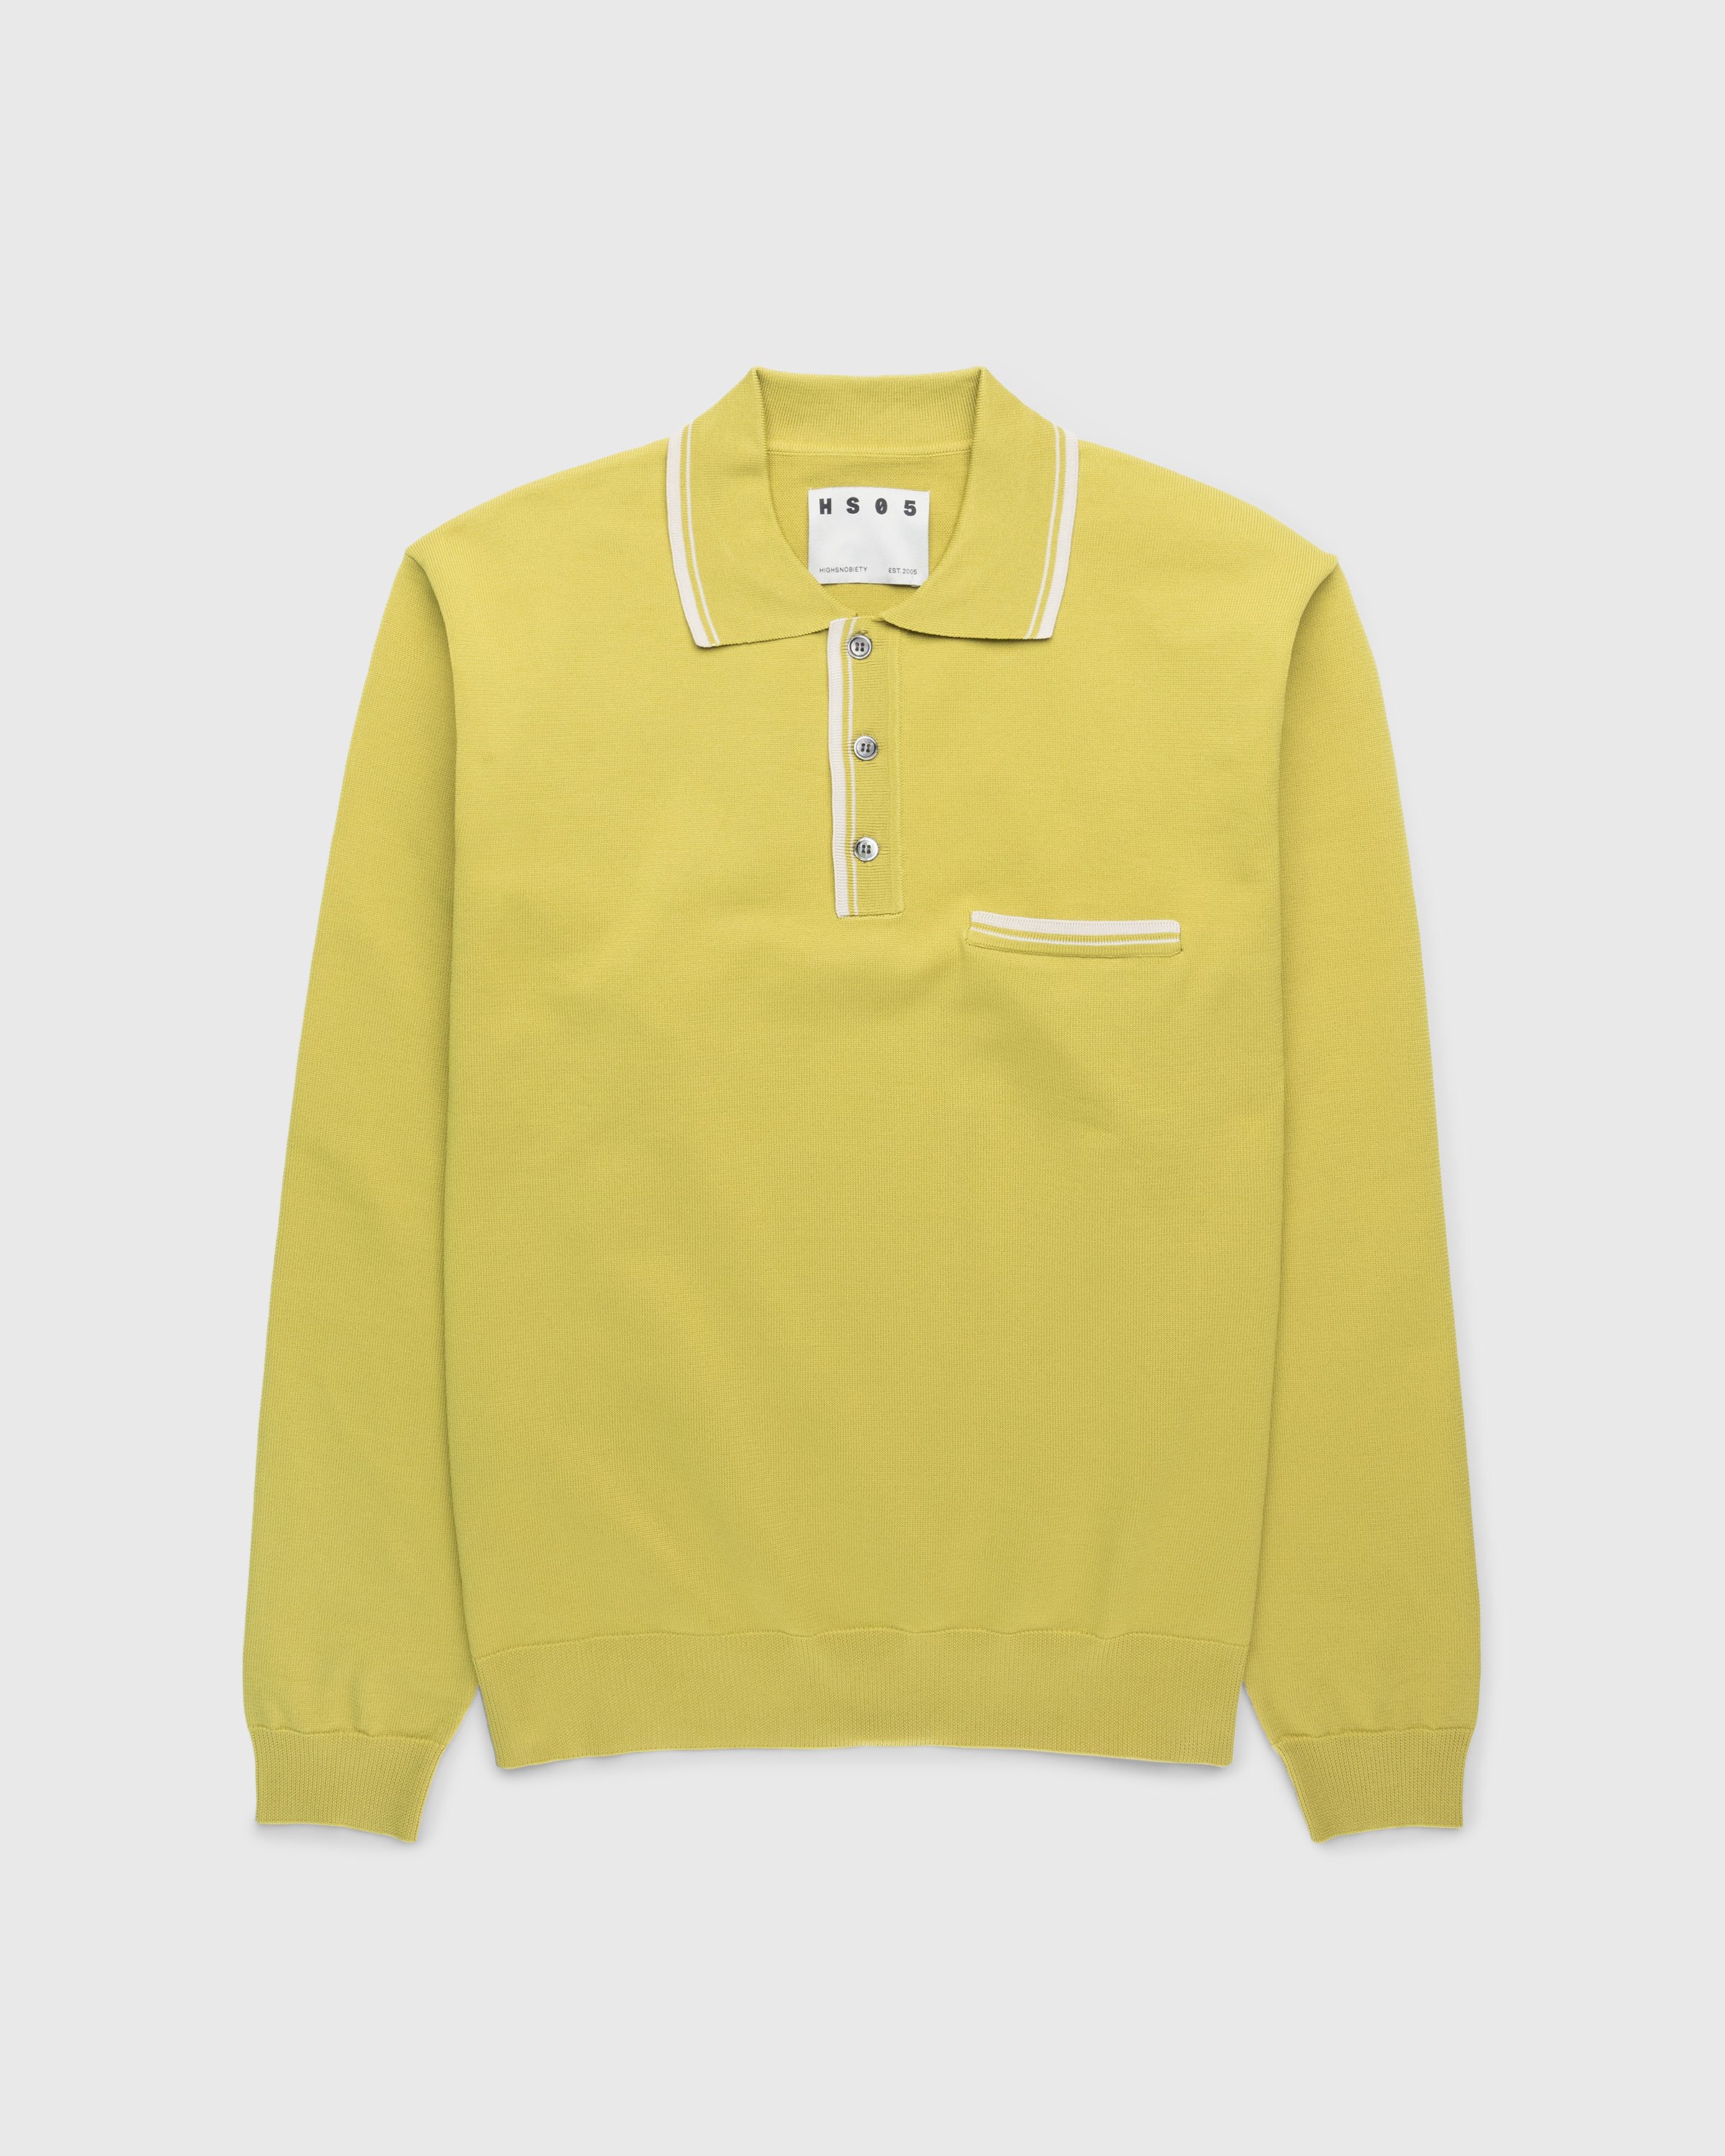 Highsnobiety HS05 - Long Sleeves Knit Polo Green - Clothing - Green - Image 1